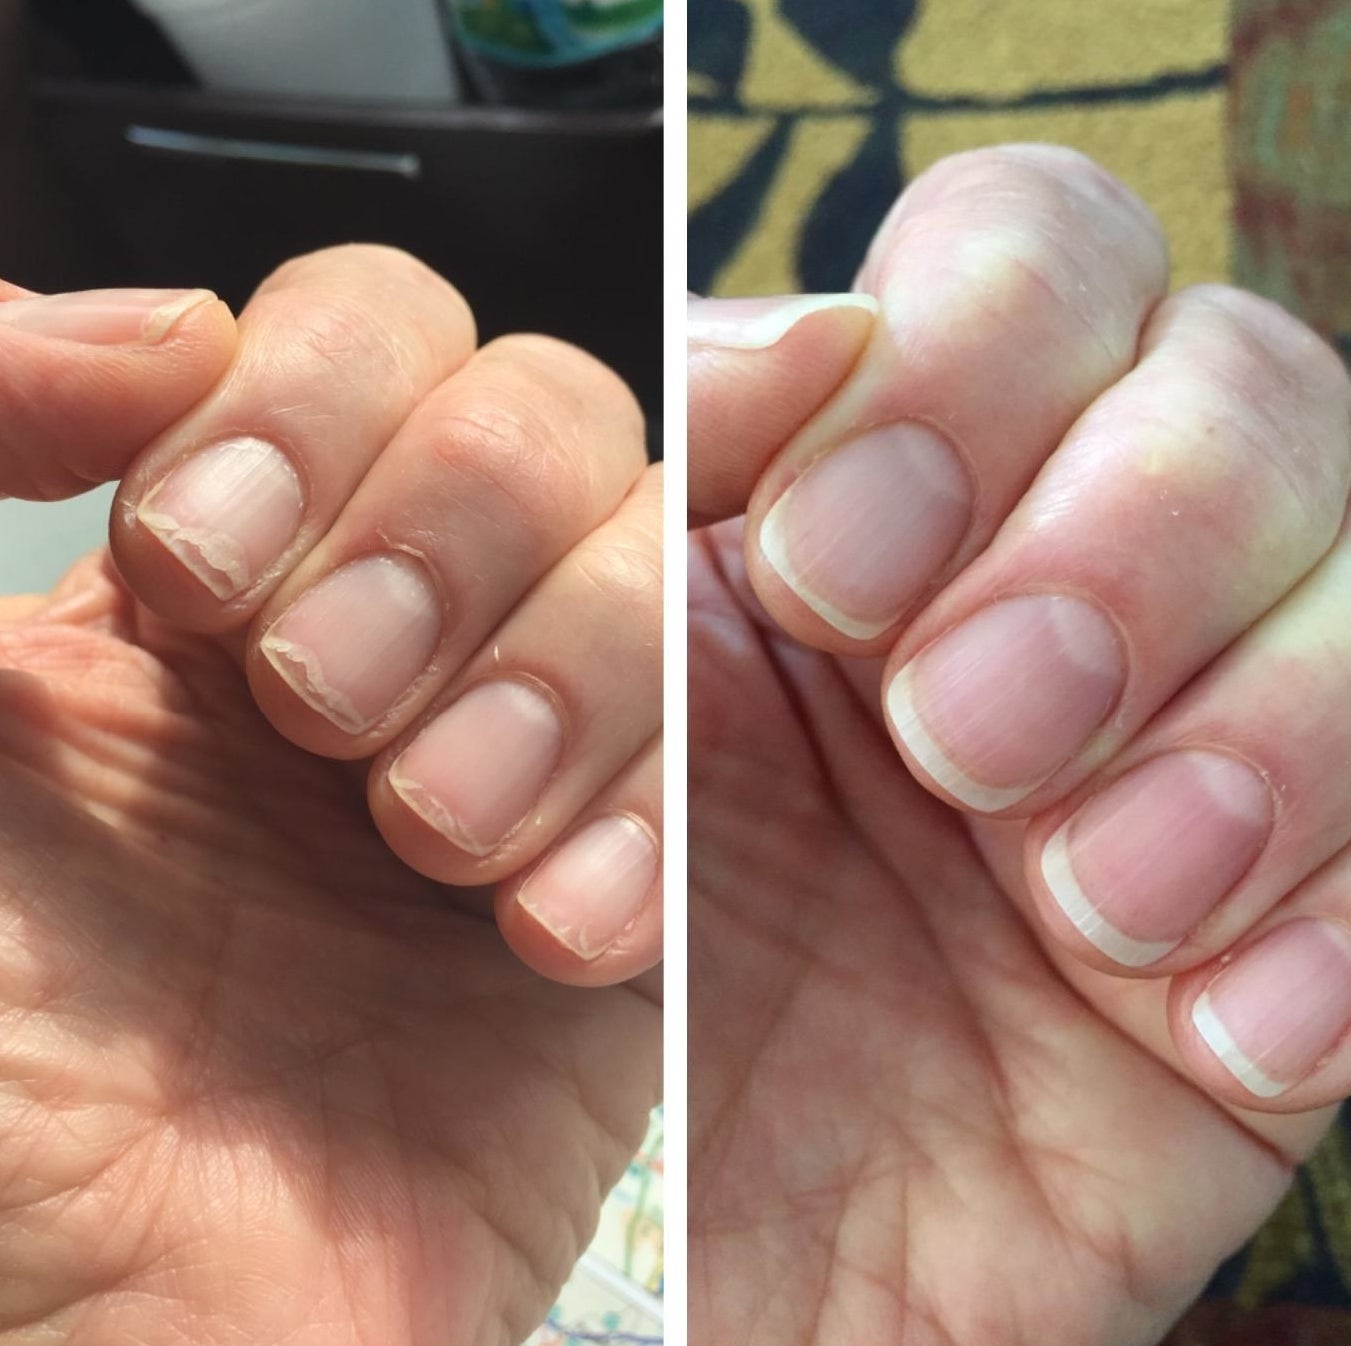 reviewer showing short nails before using the serum and long nails after using the serum